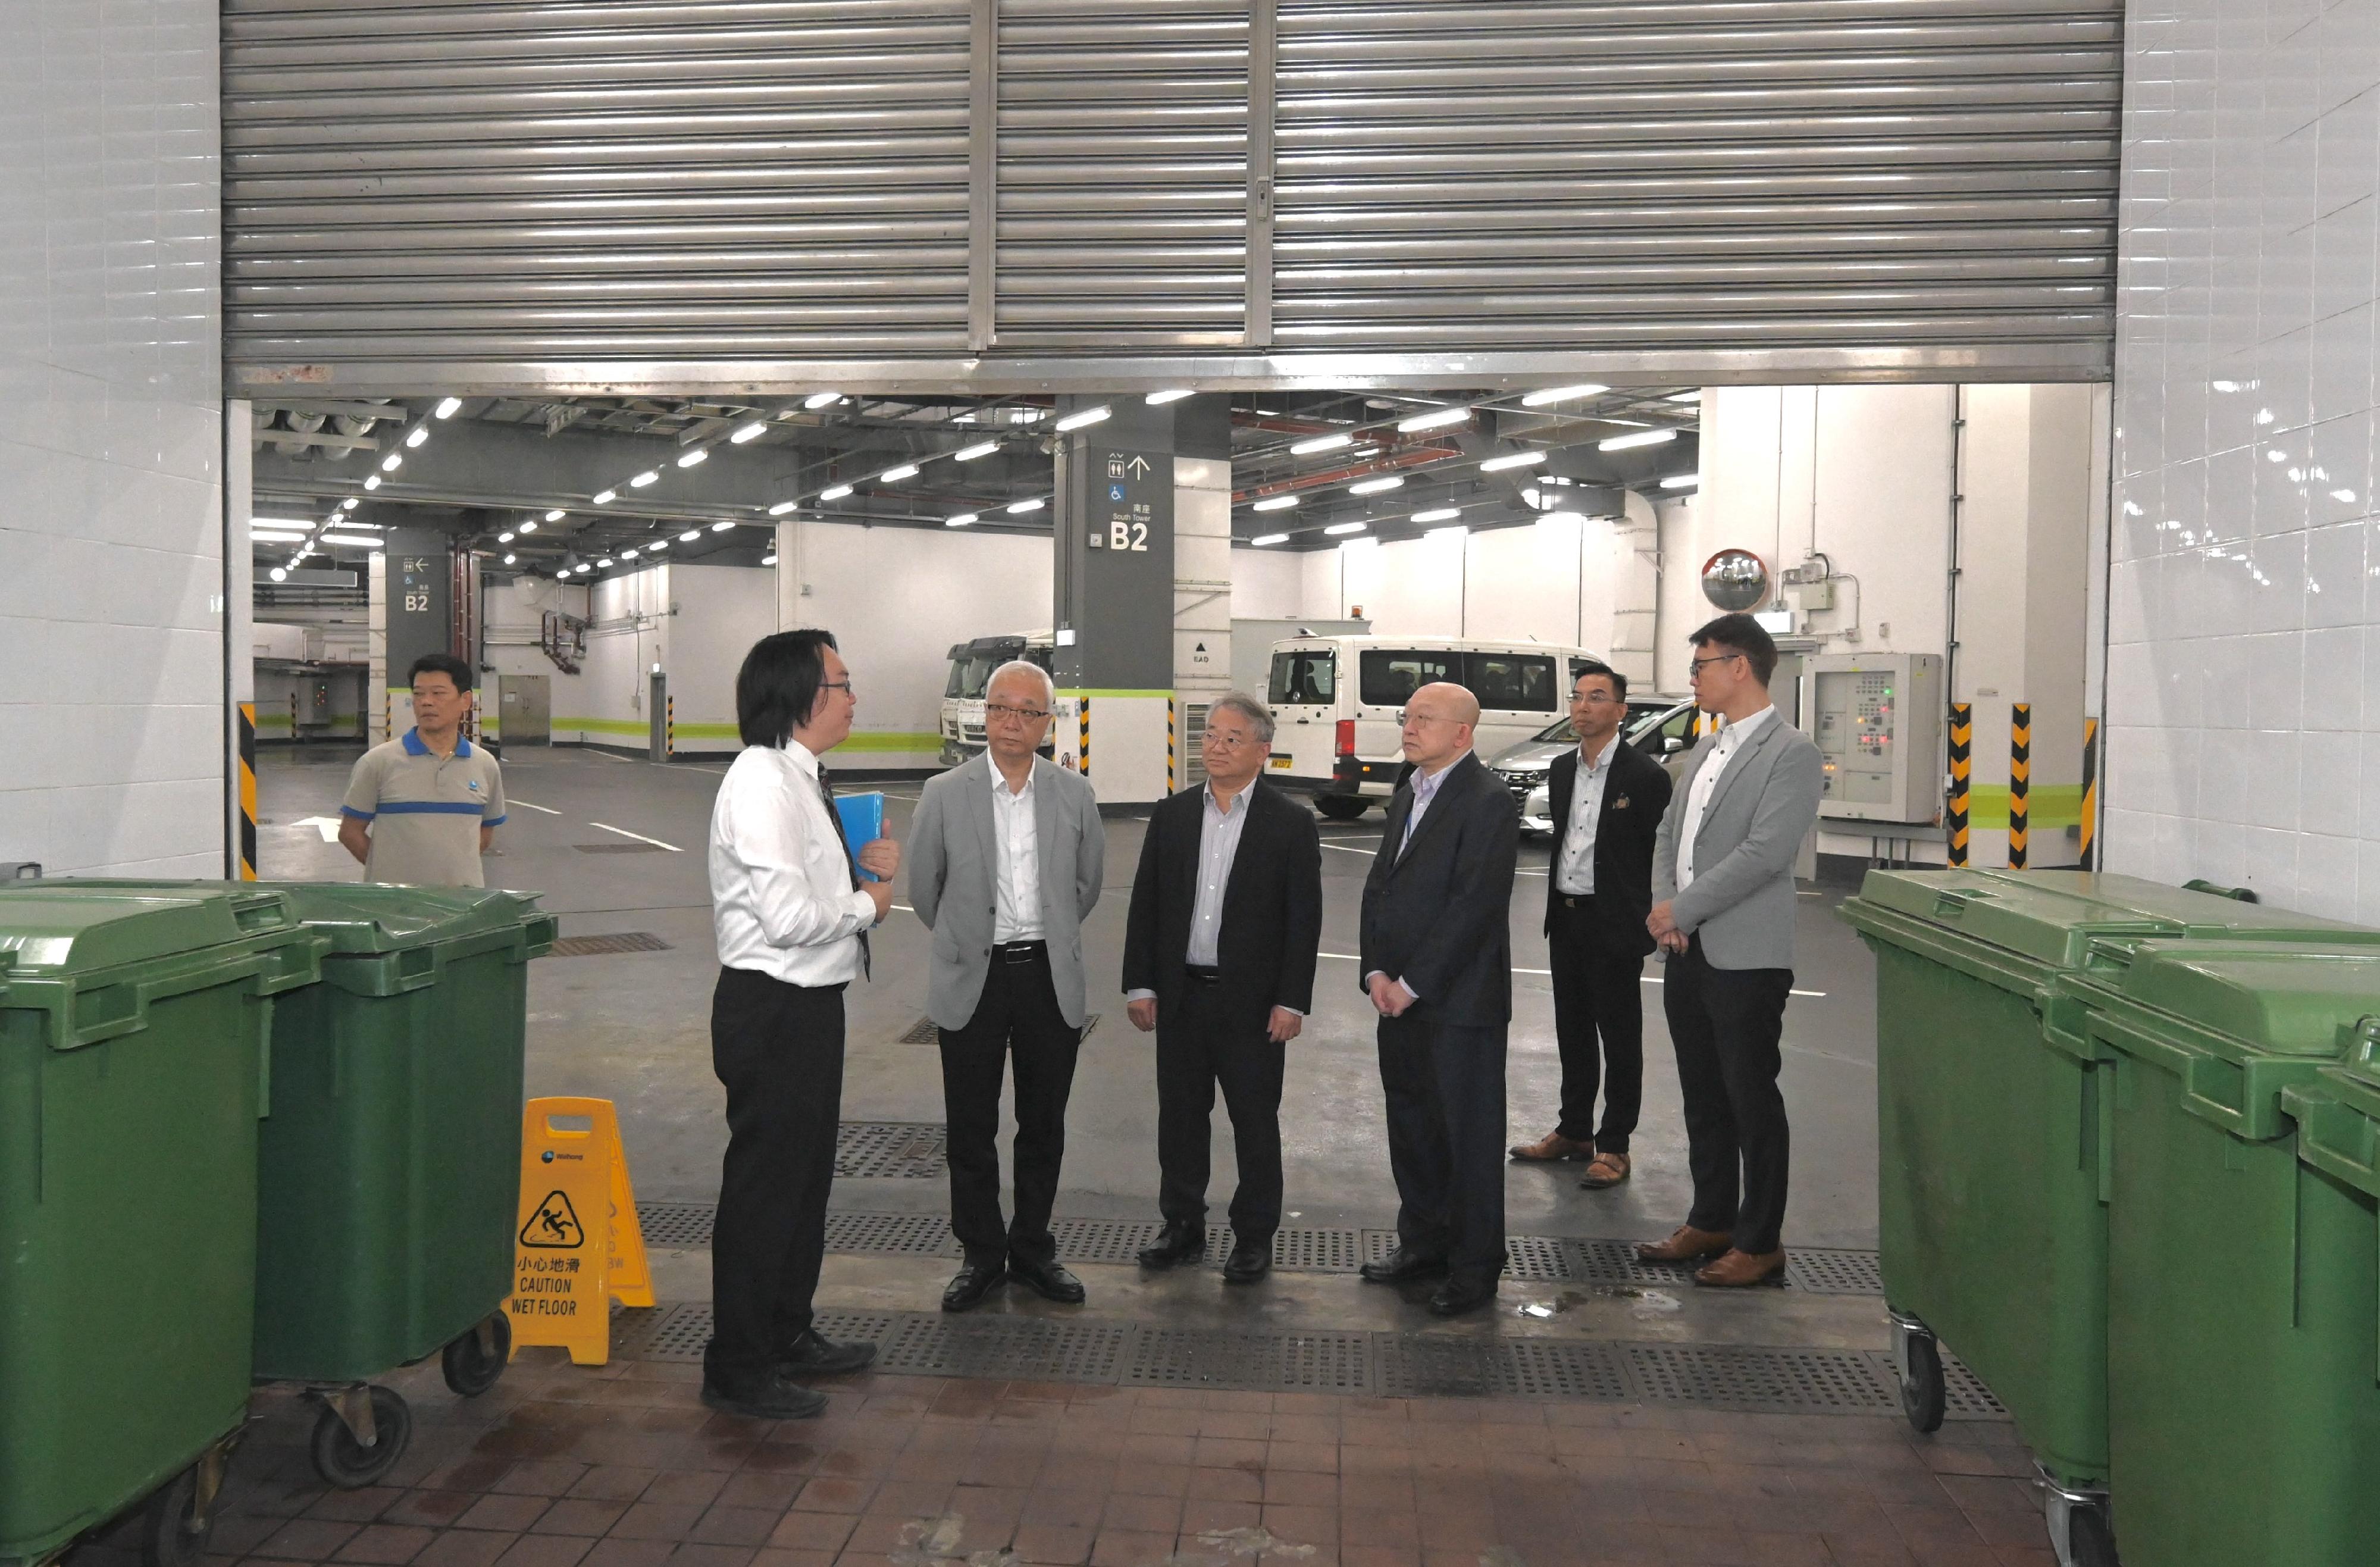 The Secretary for Environment and Ecology, Mr Tse Chin-wan, today (March 27) inspected various premises under the Municipal Solid Waste Charging Demonstration Scheme to understand the premises' preparatory work. Photo shows Mr Tse (second left) being briefed on the preparatory work for the Demonstration Scheme at West Kowloon Government Offices. He is accompanied by the Director of Environmental Protection, Dr Samuel Chui (third left), and the Government Property Administrator, Mr Eugene Fung (third right).